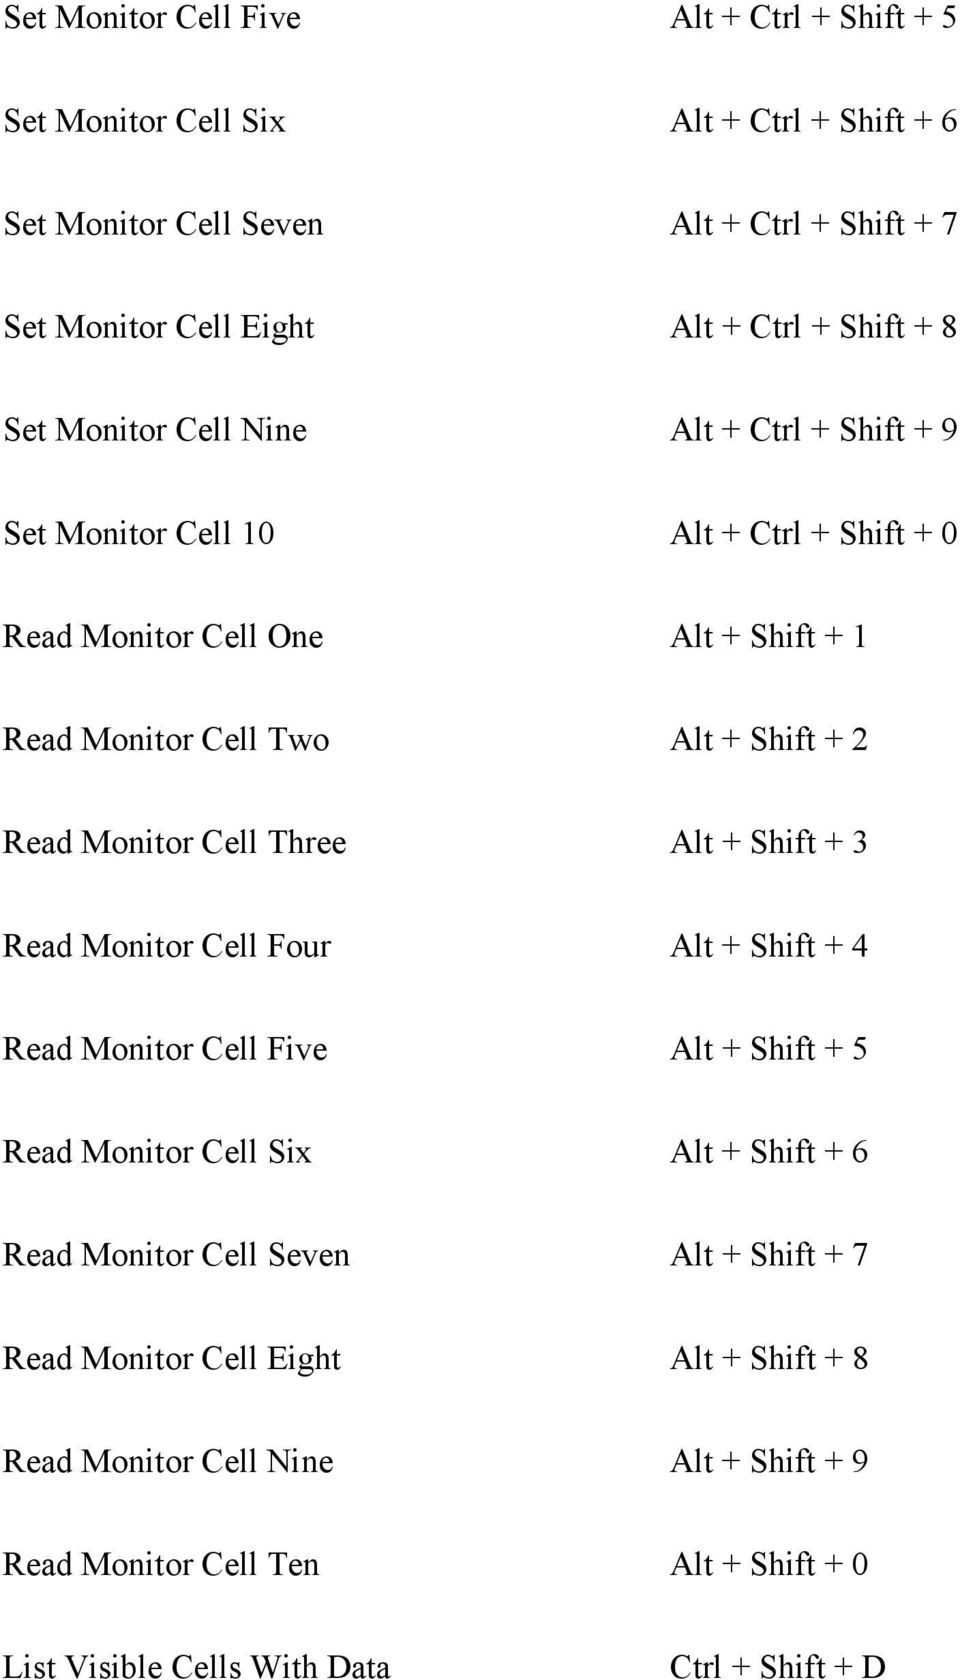 Read Monitor Cell Three Alt + Shift + 3 Read Monitor Cell Four Alt + Shift + 4 Read Monitor Cell Five Alt + Shift + 5 Read Monitor Cell Six Alt + Shift + 6 Read Monitor Cell